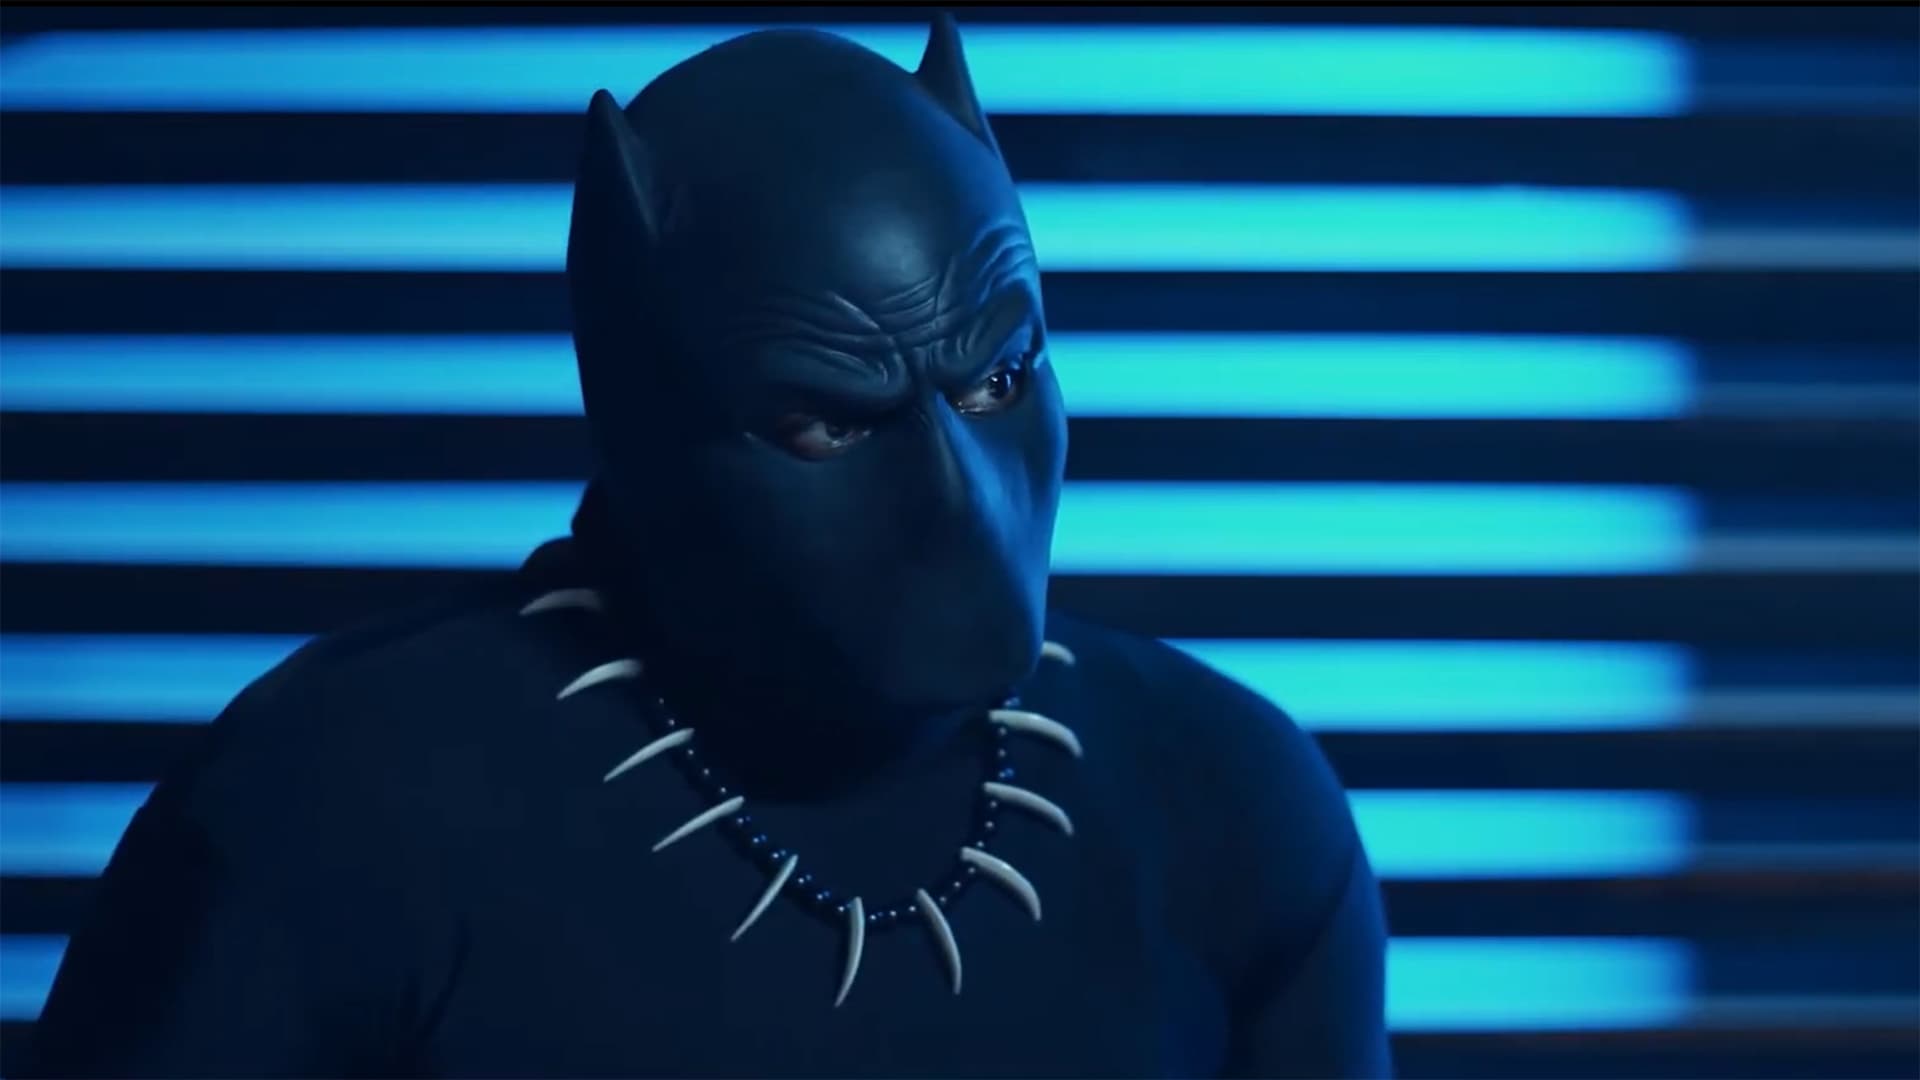 screengrab from "The Black League of Superheroes"